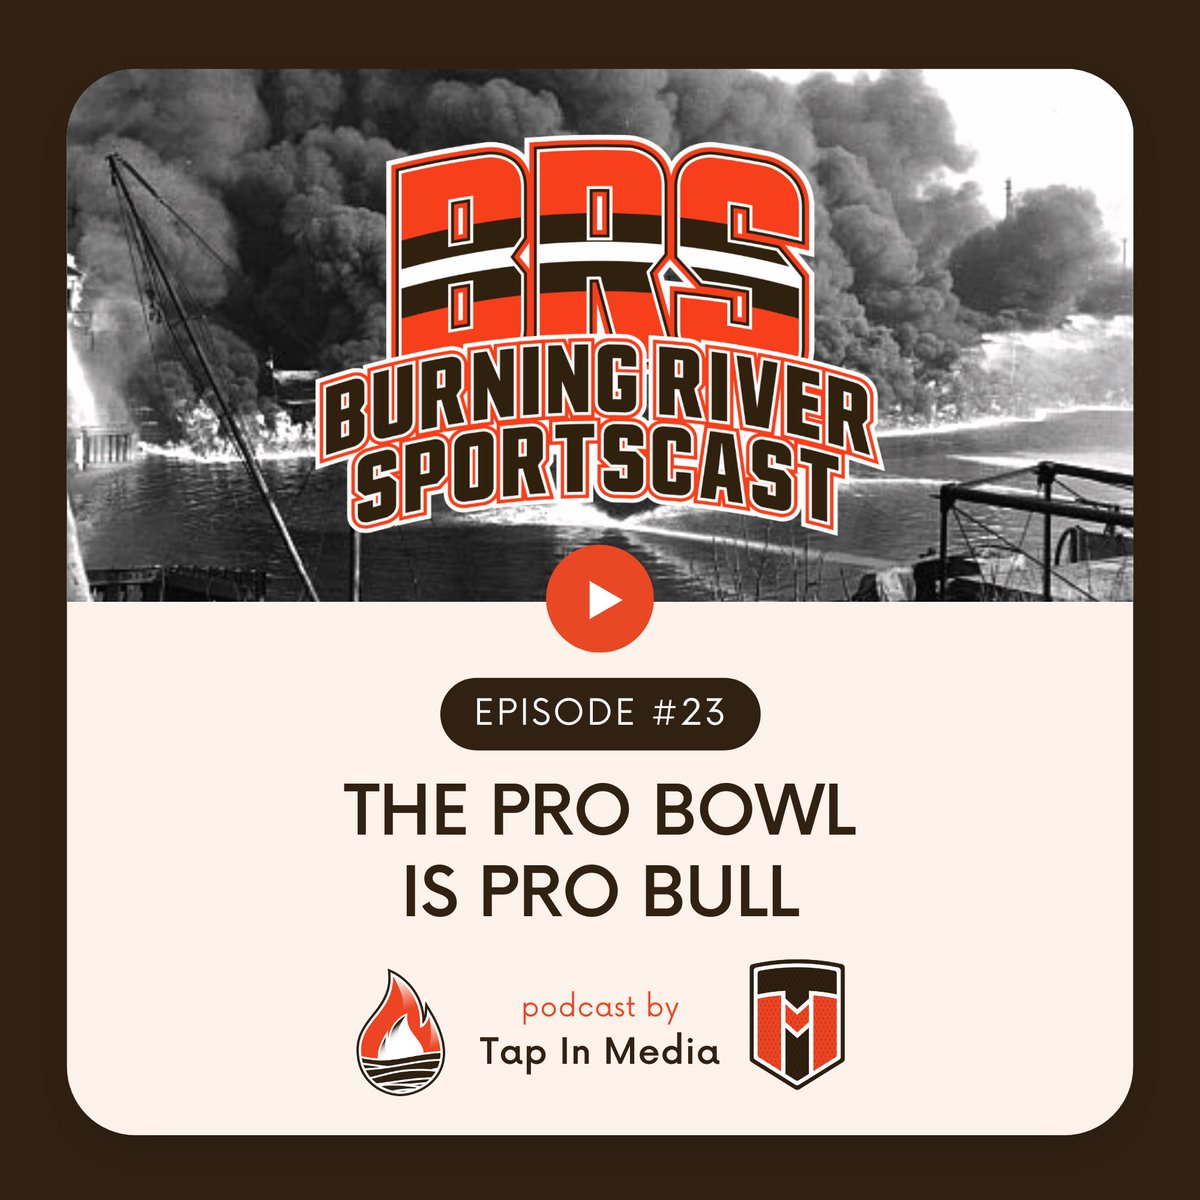 Episode #23 of #BurningRiverSportscast just dropped!

#ListenNow on #ApplePodcasts, #Spotify, or wherever you get your #podcasts! 

The #ProBowlGames took place this past week and it was exactly what we thought it would be... a bunch of #ProBull!

#Browns #ForTheLand #LetEmKnow